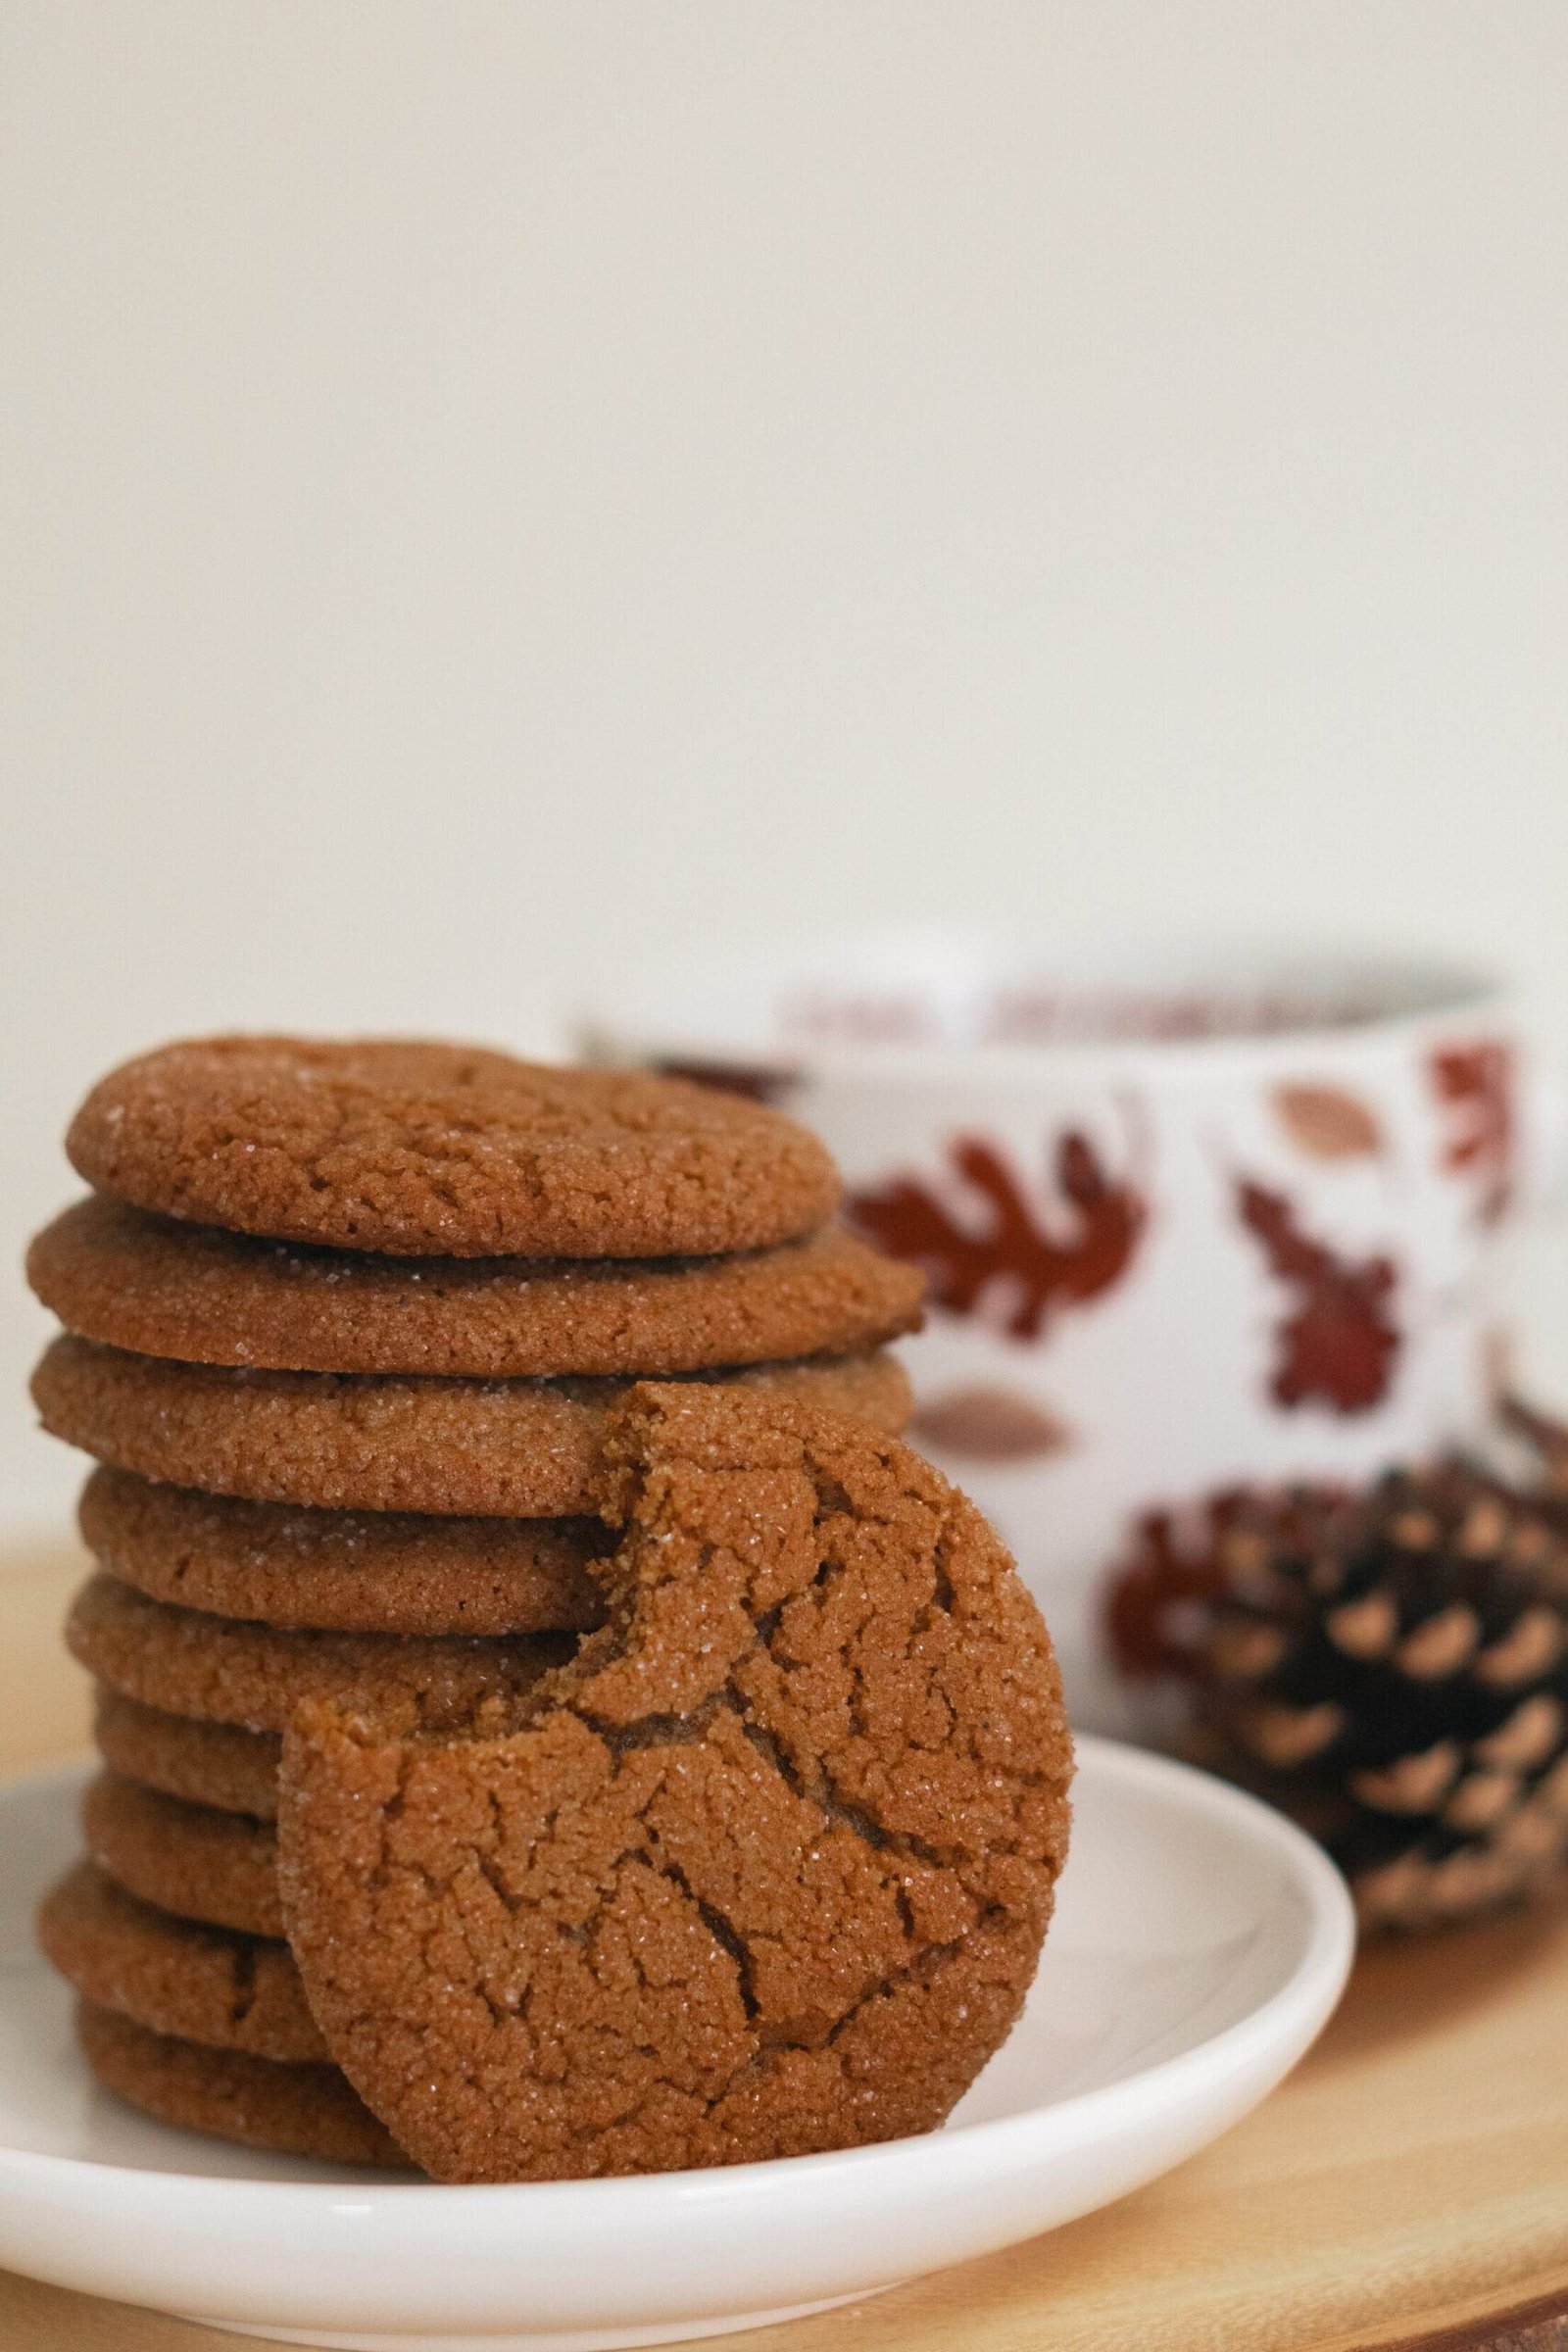 a cookie with a bite taken out propped against a stack of cookies with a mug in the background